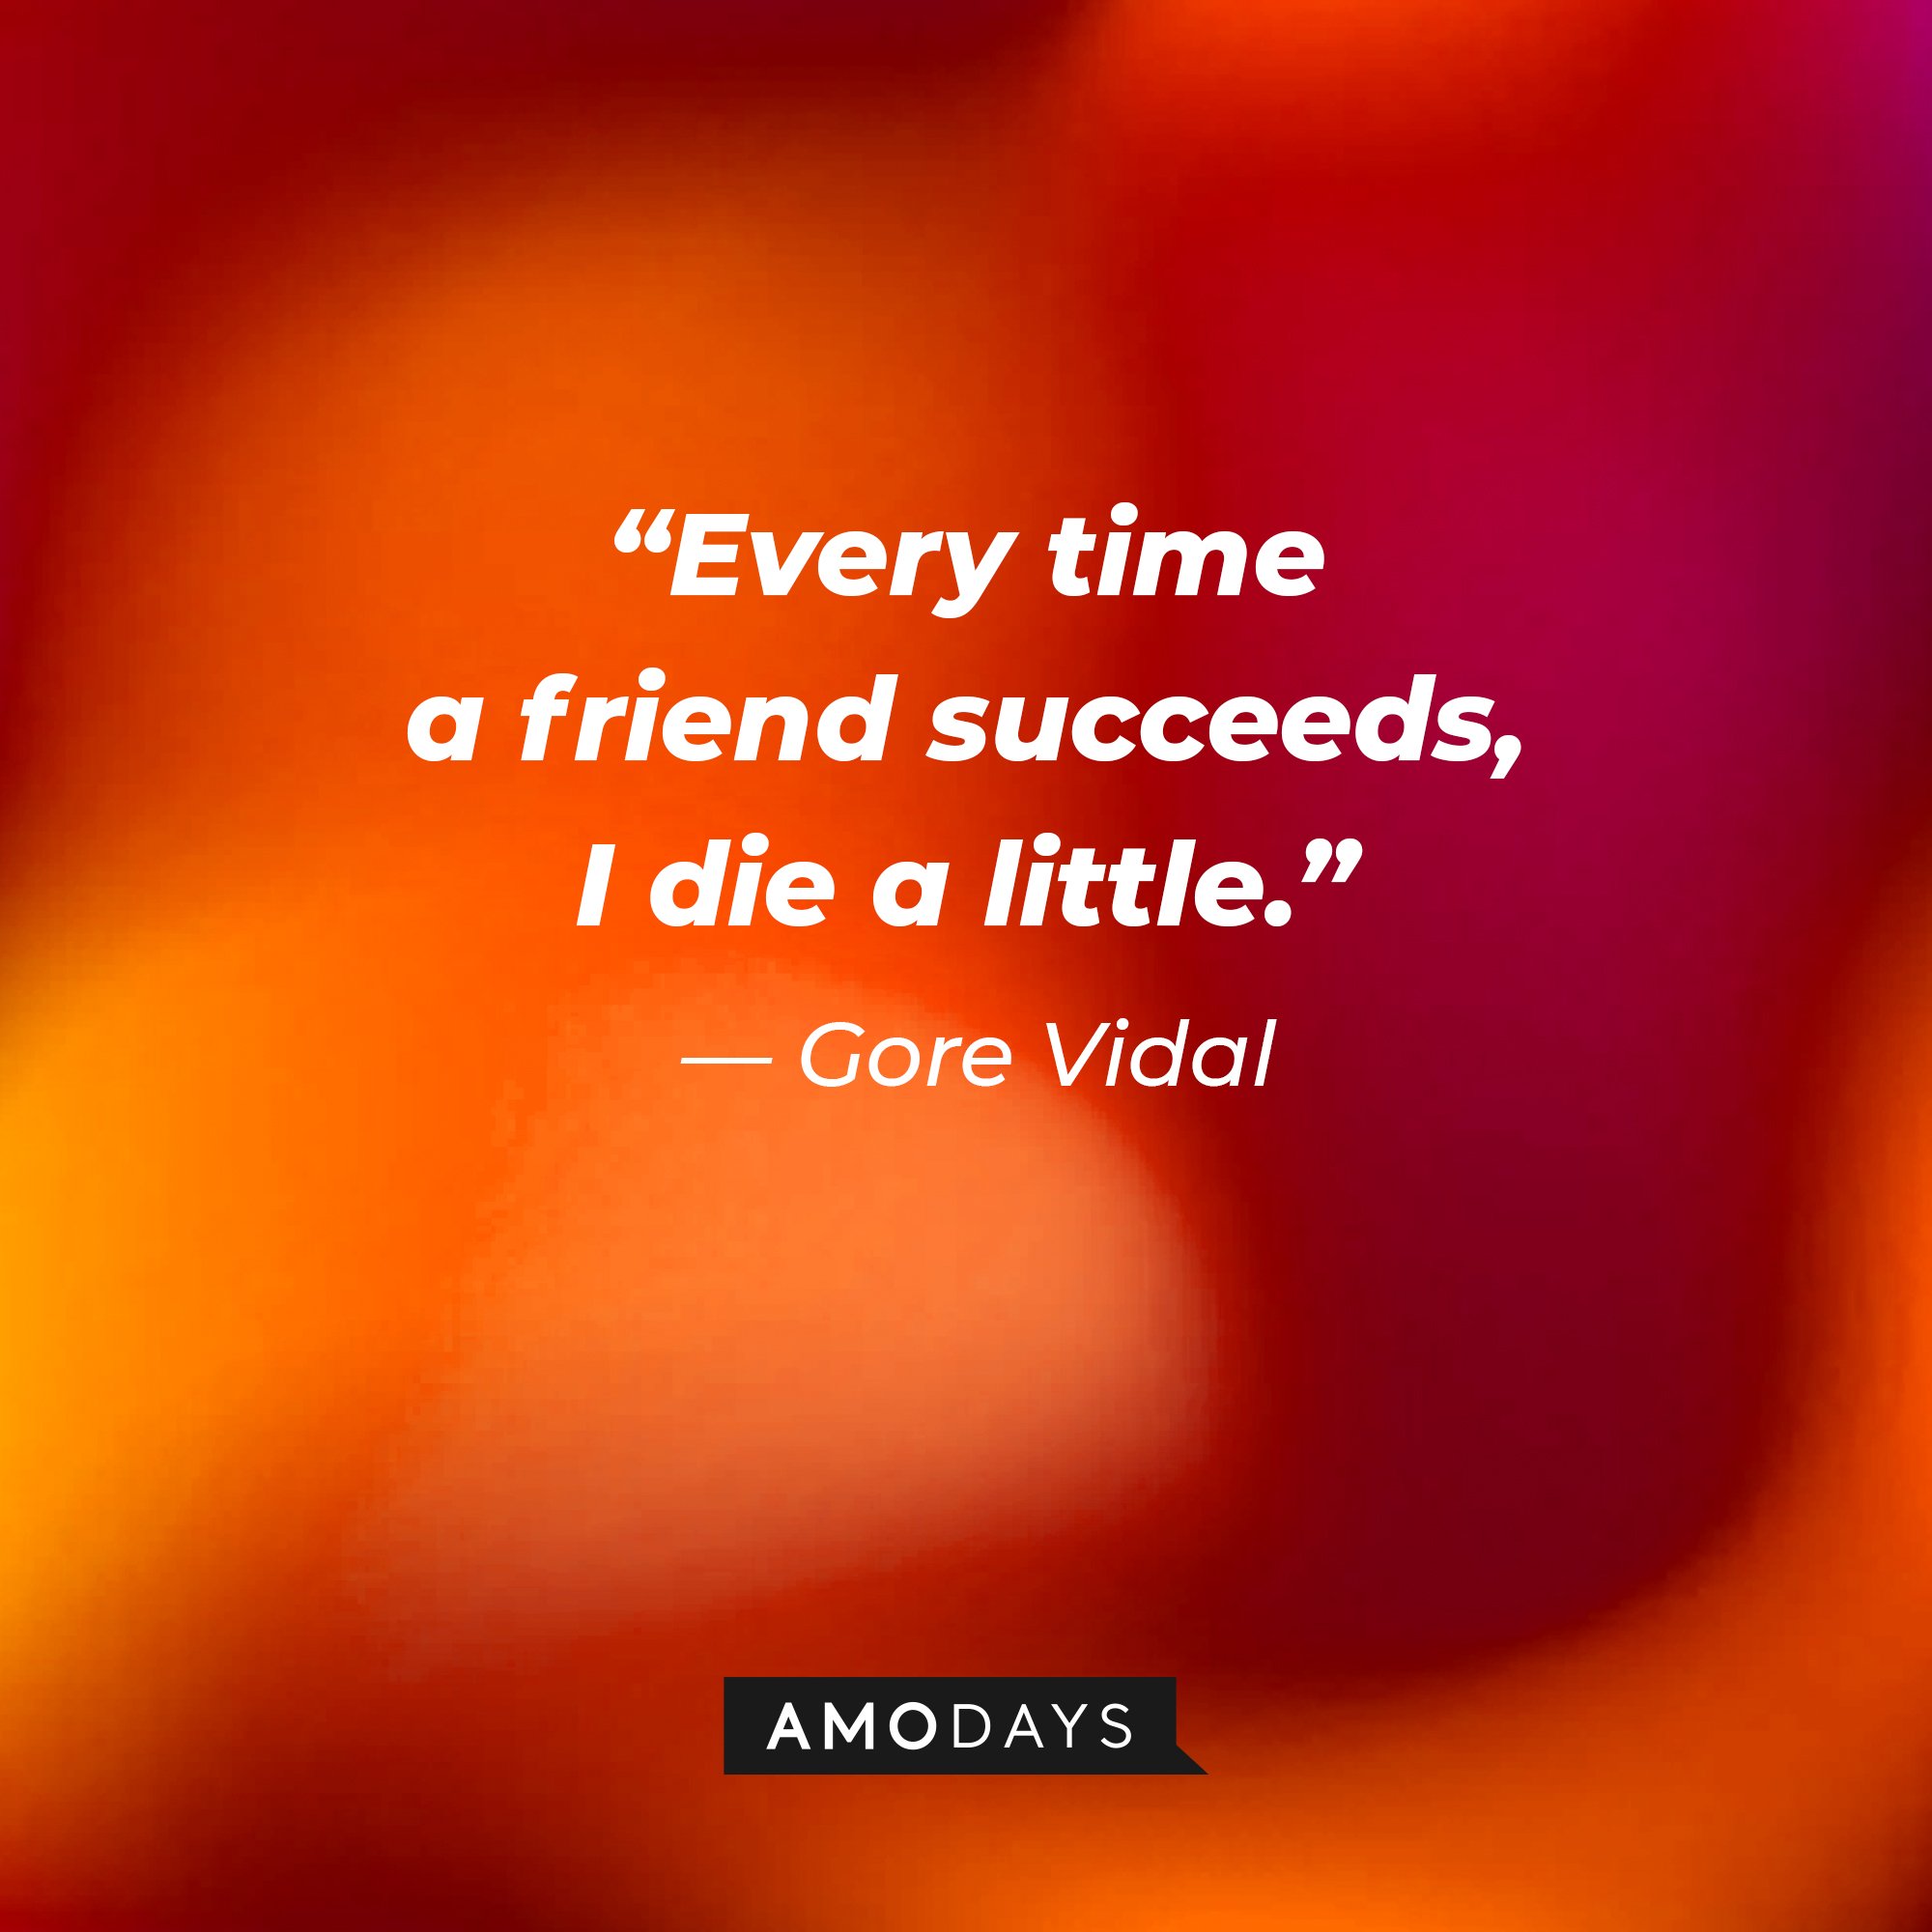  Gore Vidal's quote: “Every time a friend succeeds, I die a little.” | Image: AmoDays